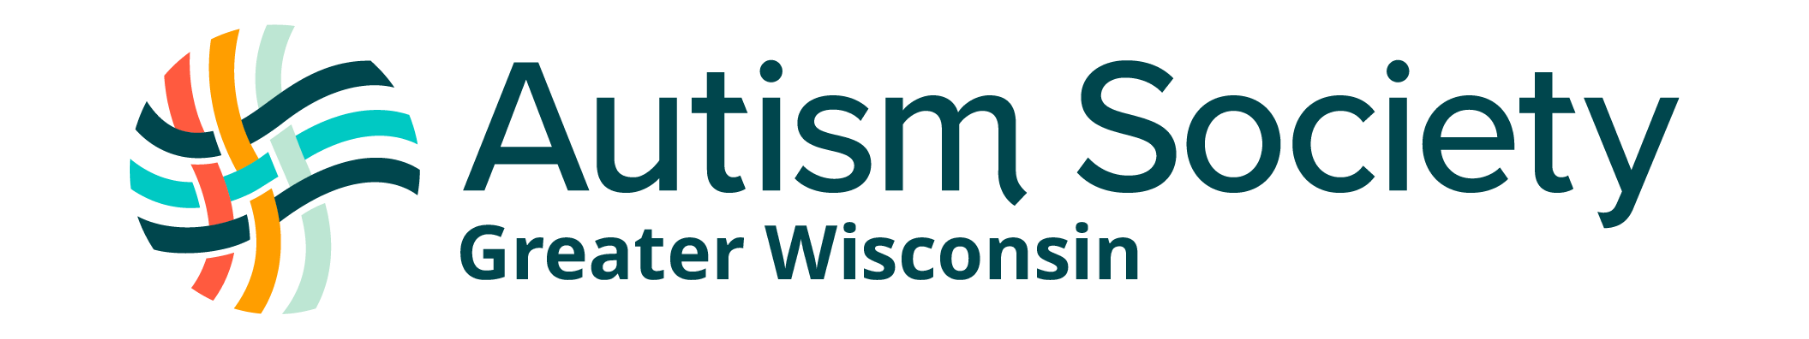 Autism Society of Greater Wisconsin